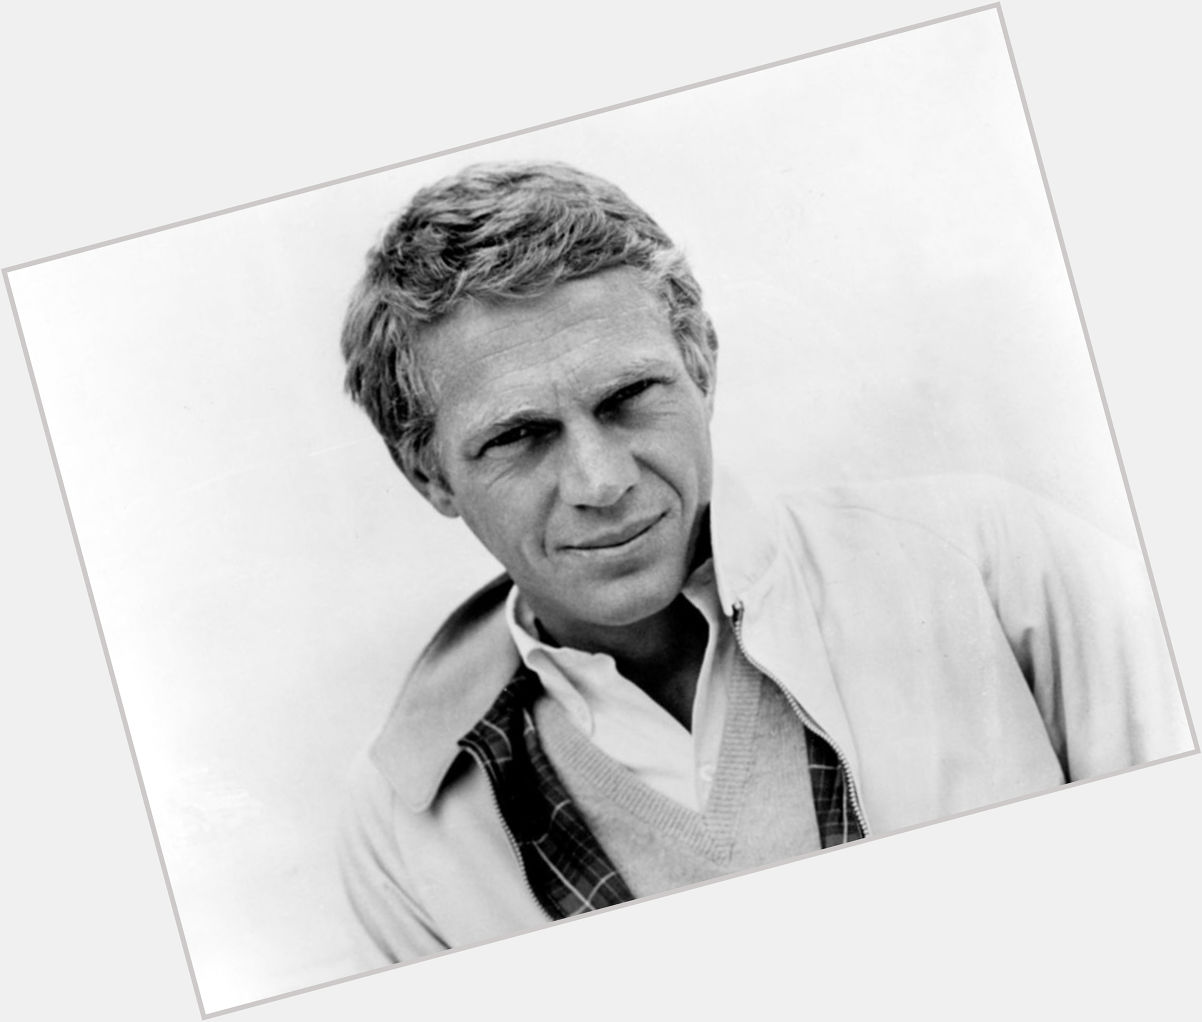 Happy Birthday to the \"King of Cool\", Steve McQueen! 